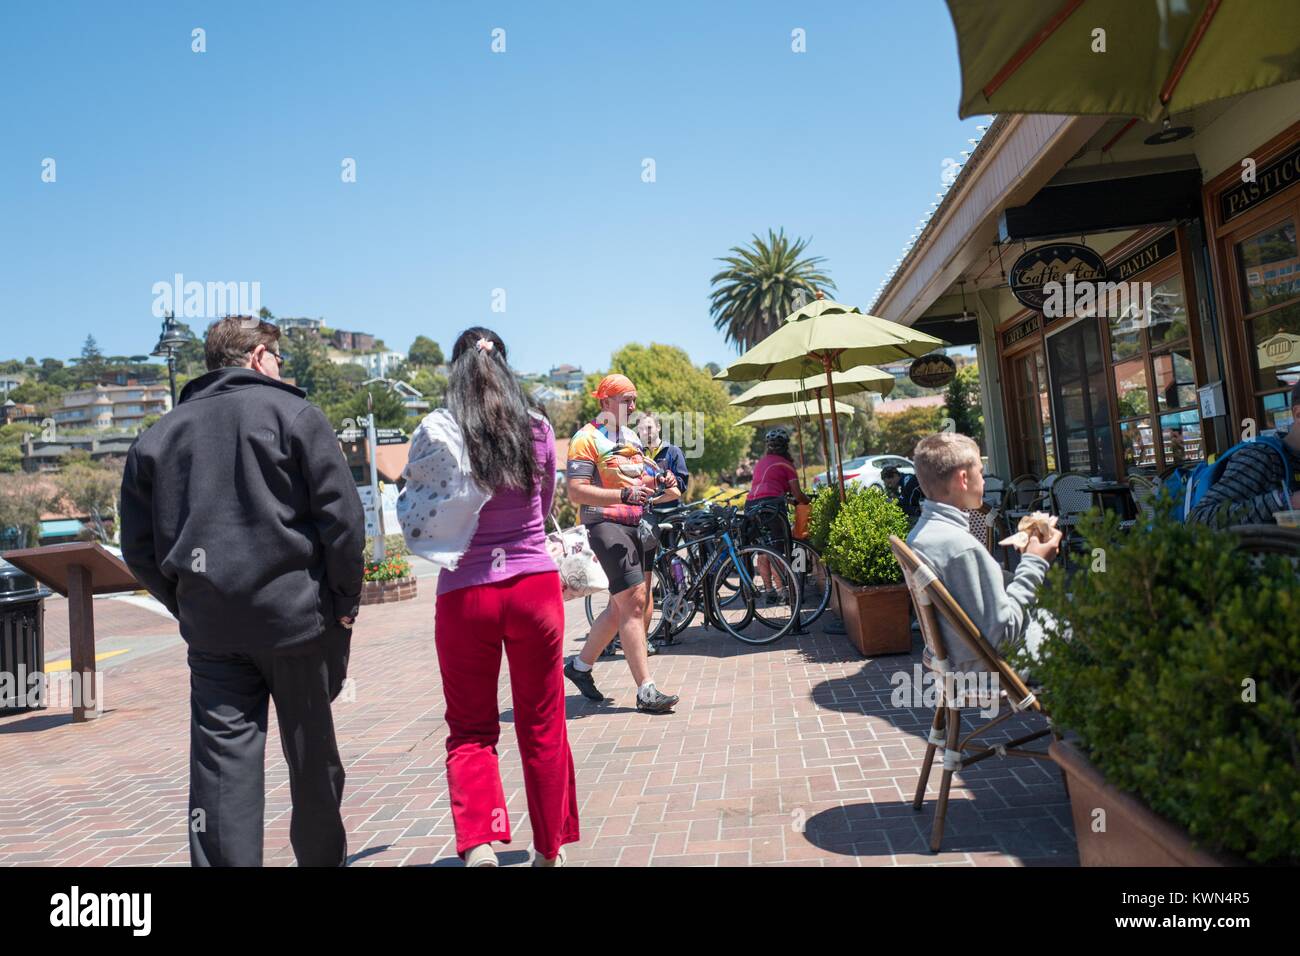 Cyclists, tourists and locals walk through downtown Tiburon, California on a sunny day, August 7, 2016. Stock Photo